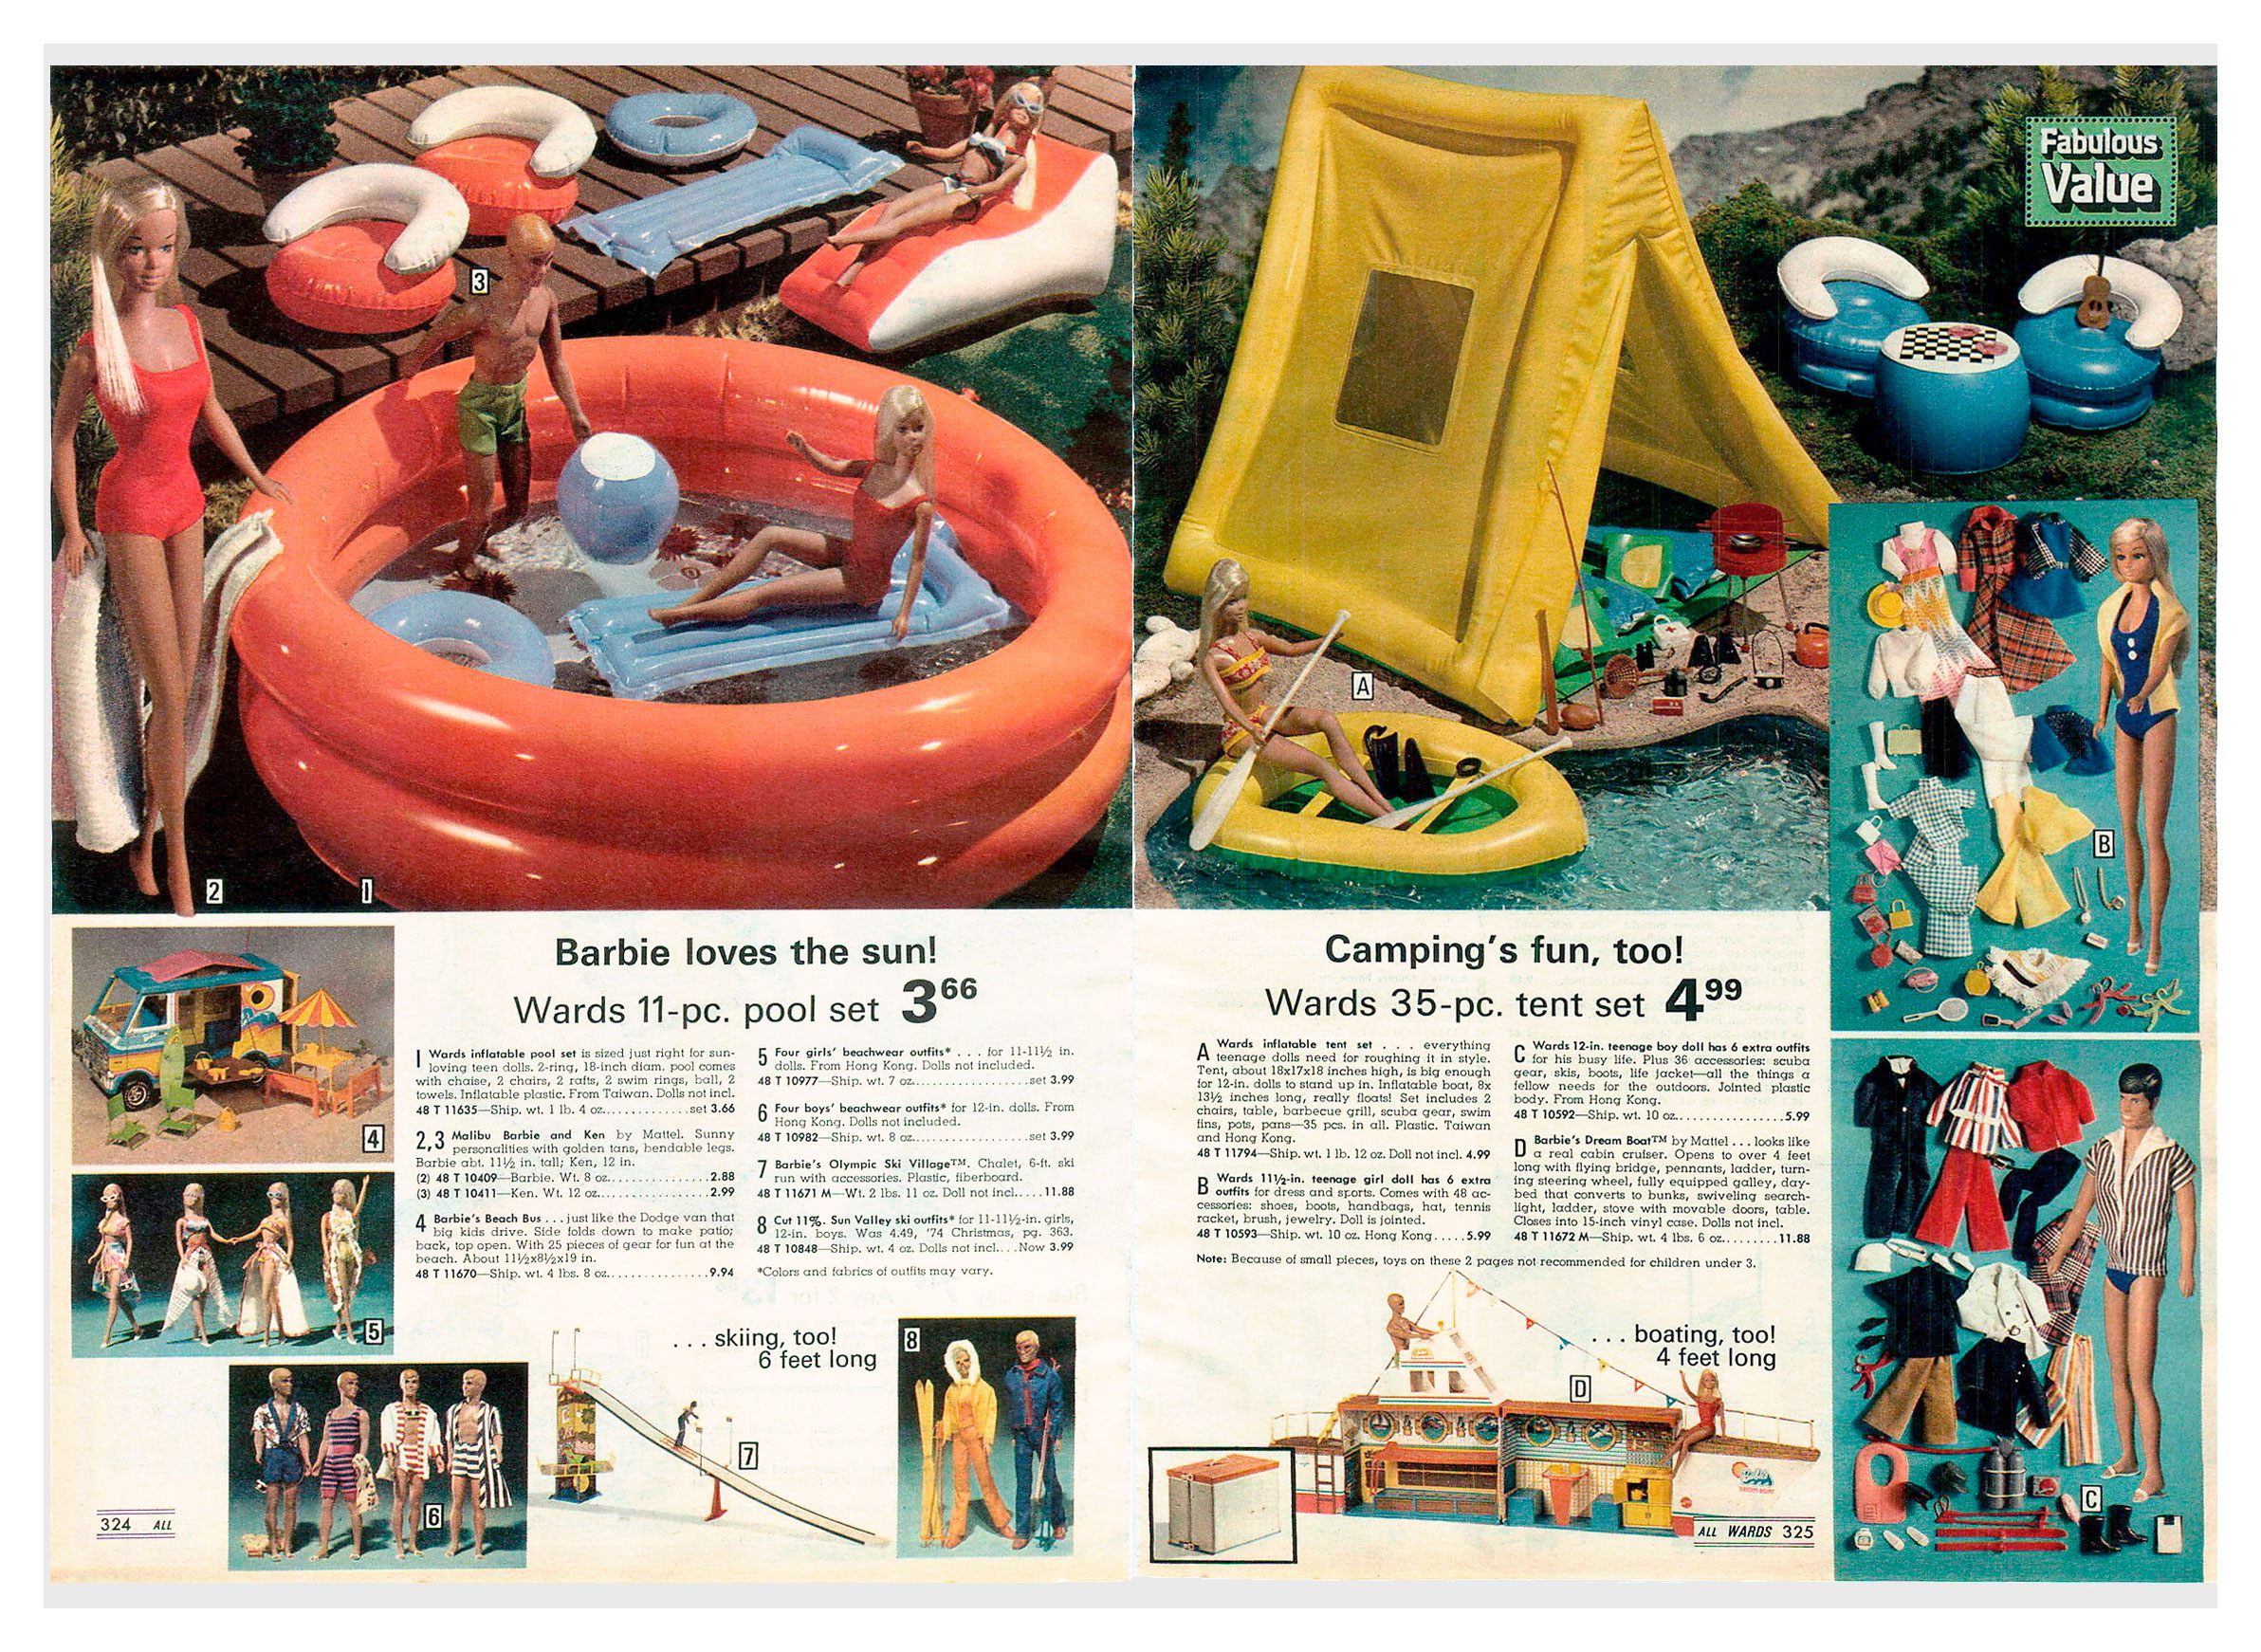 From 1975 Montgomery Ward Christmas catalogue